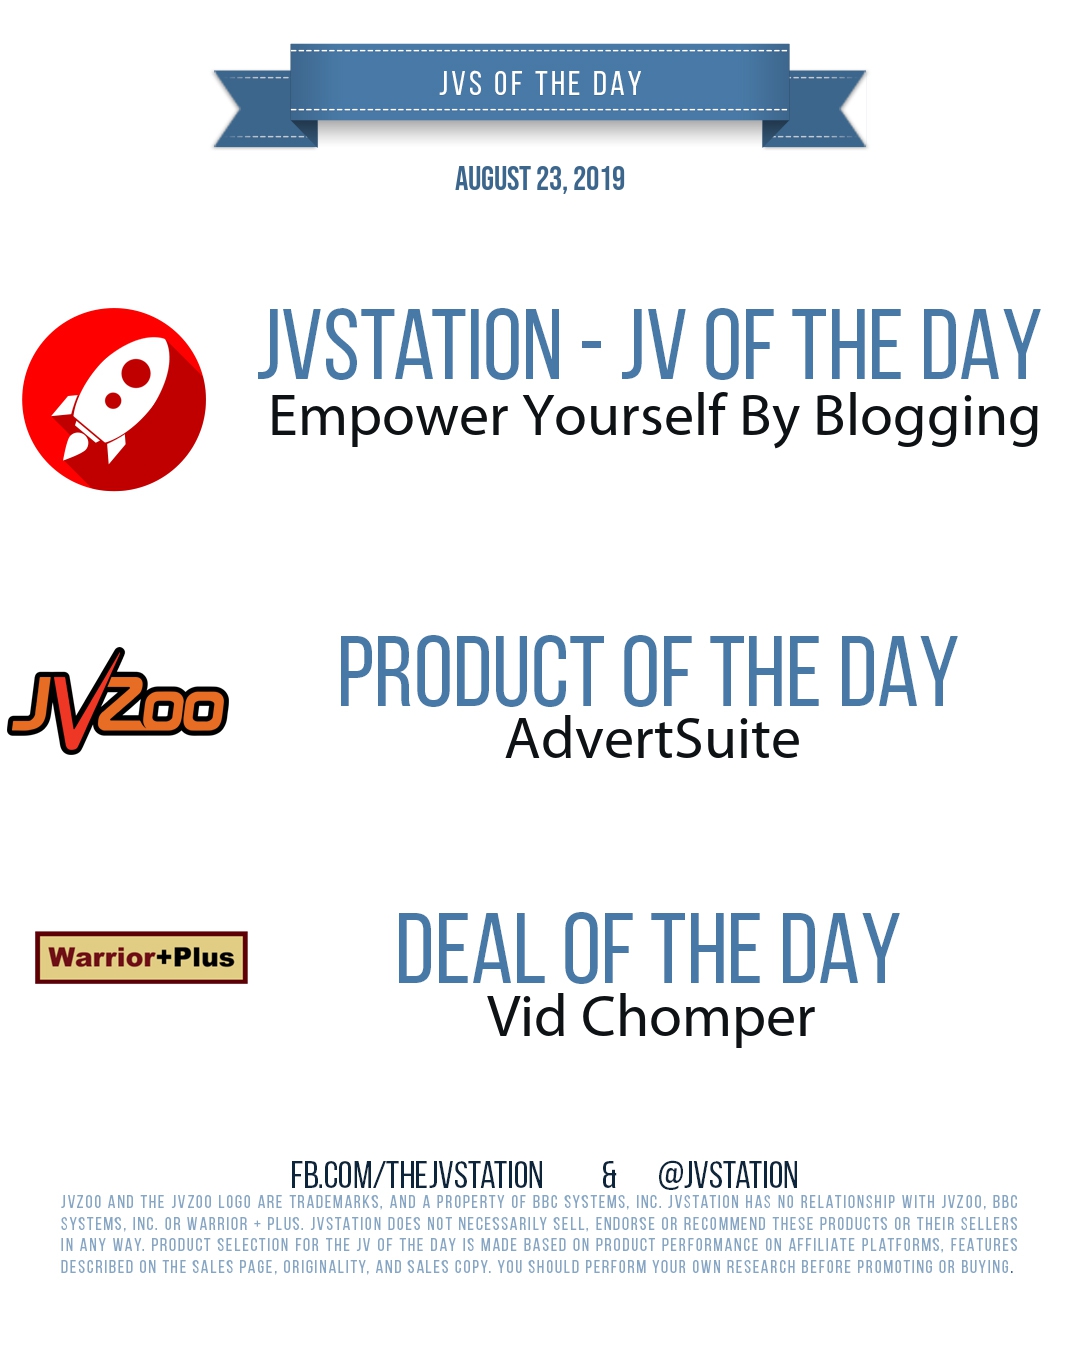 JVs of the day - August 23, 2019